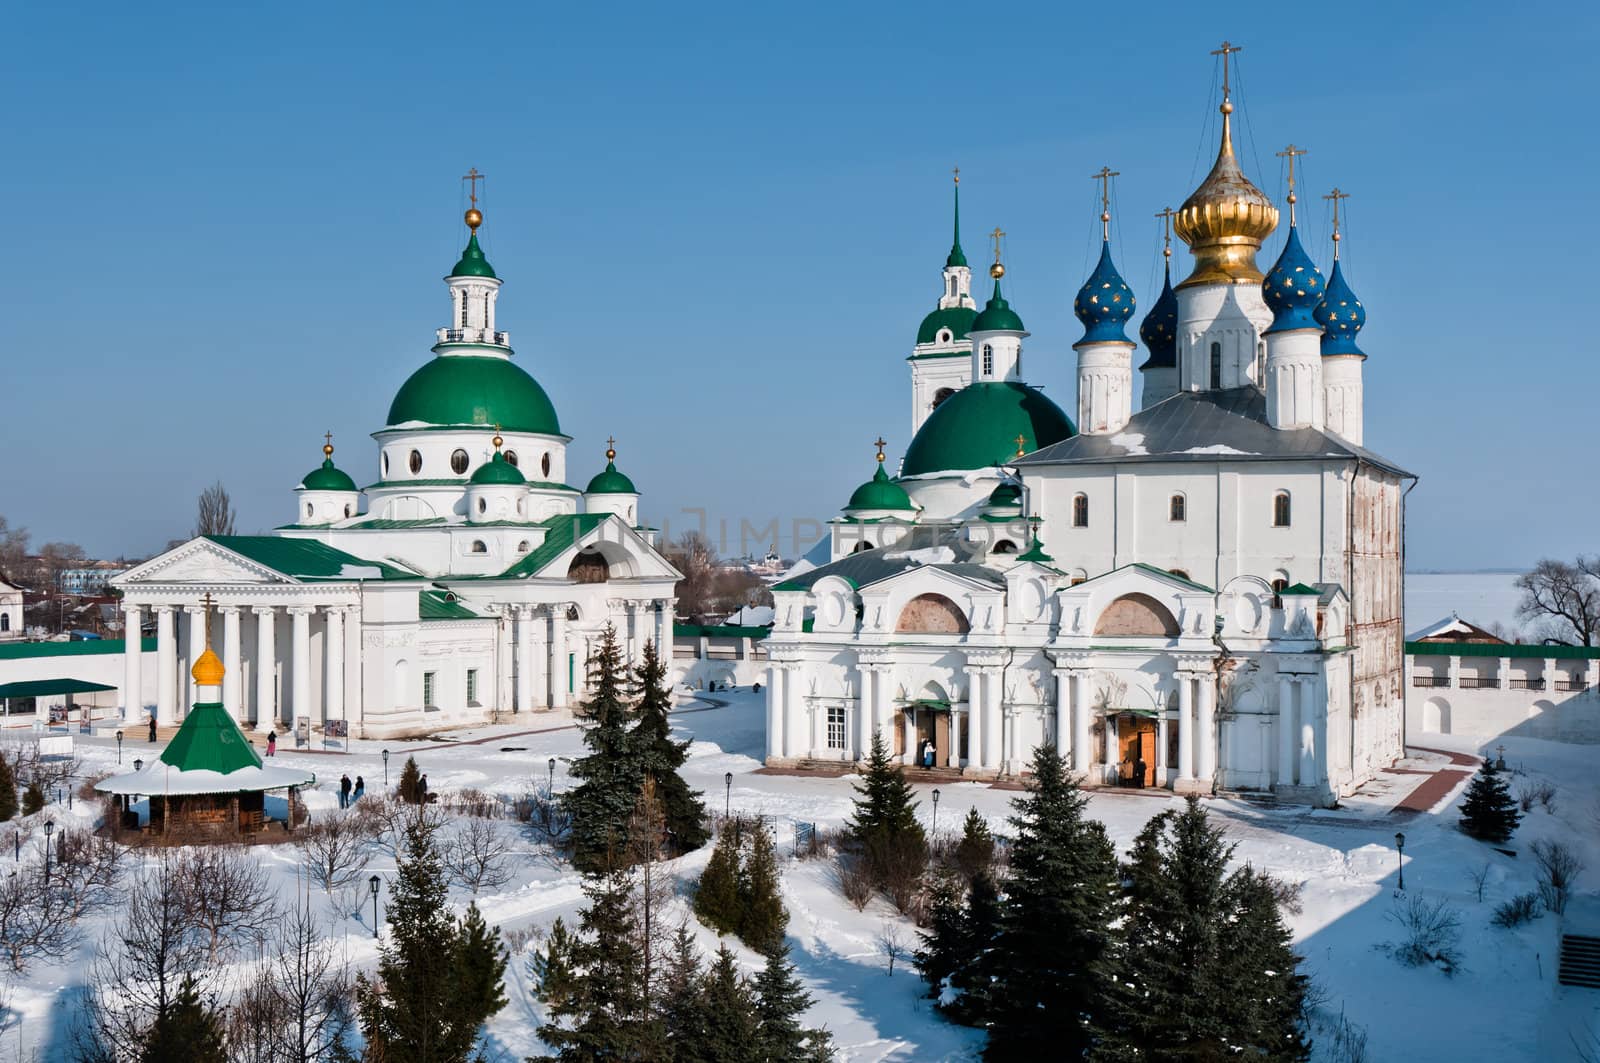 Men monastery in snow, two churches with domes on area